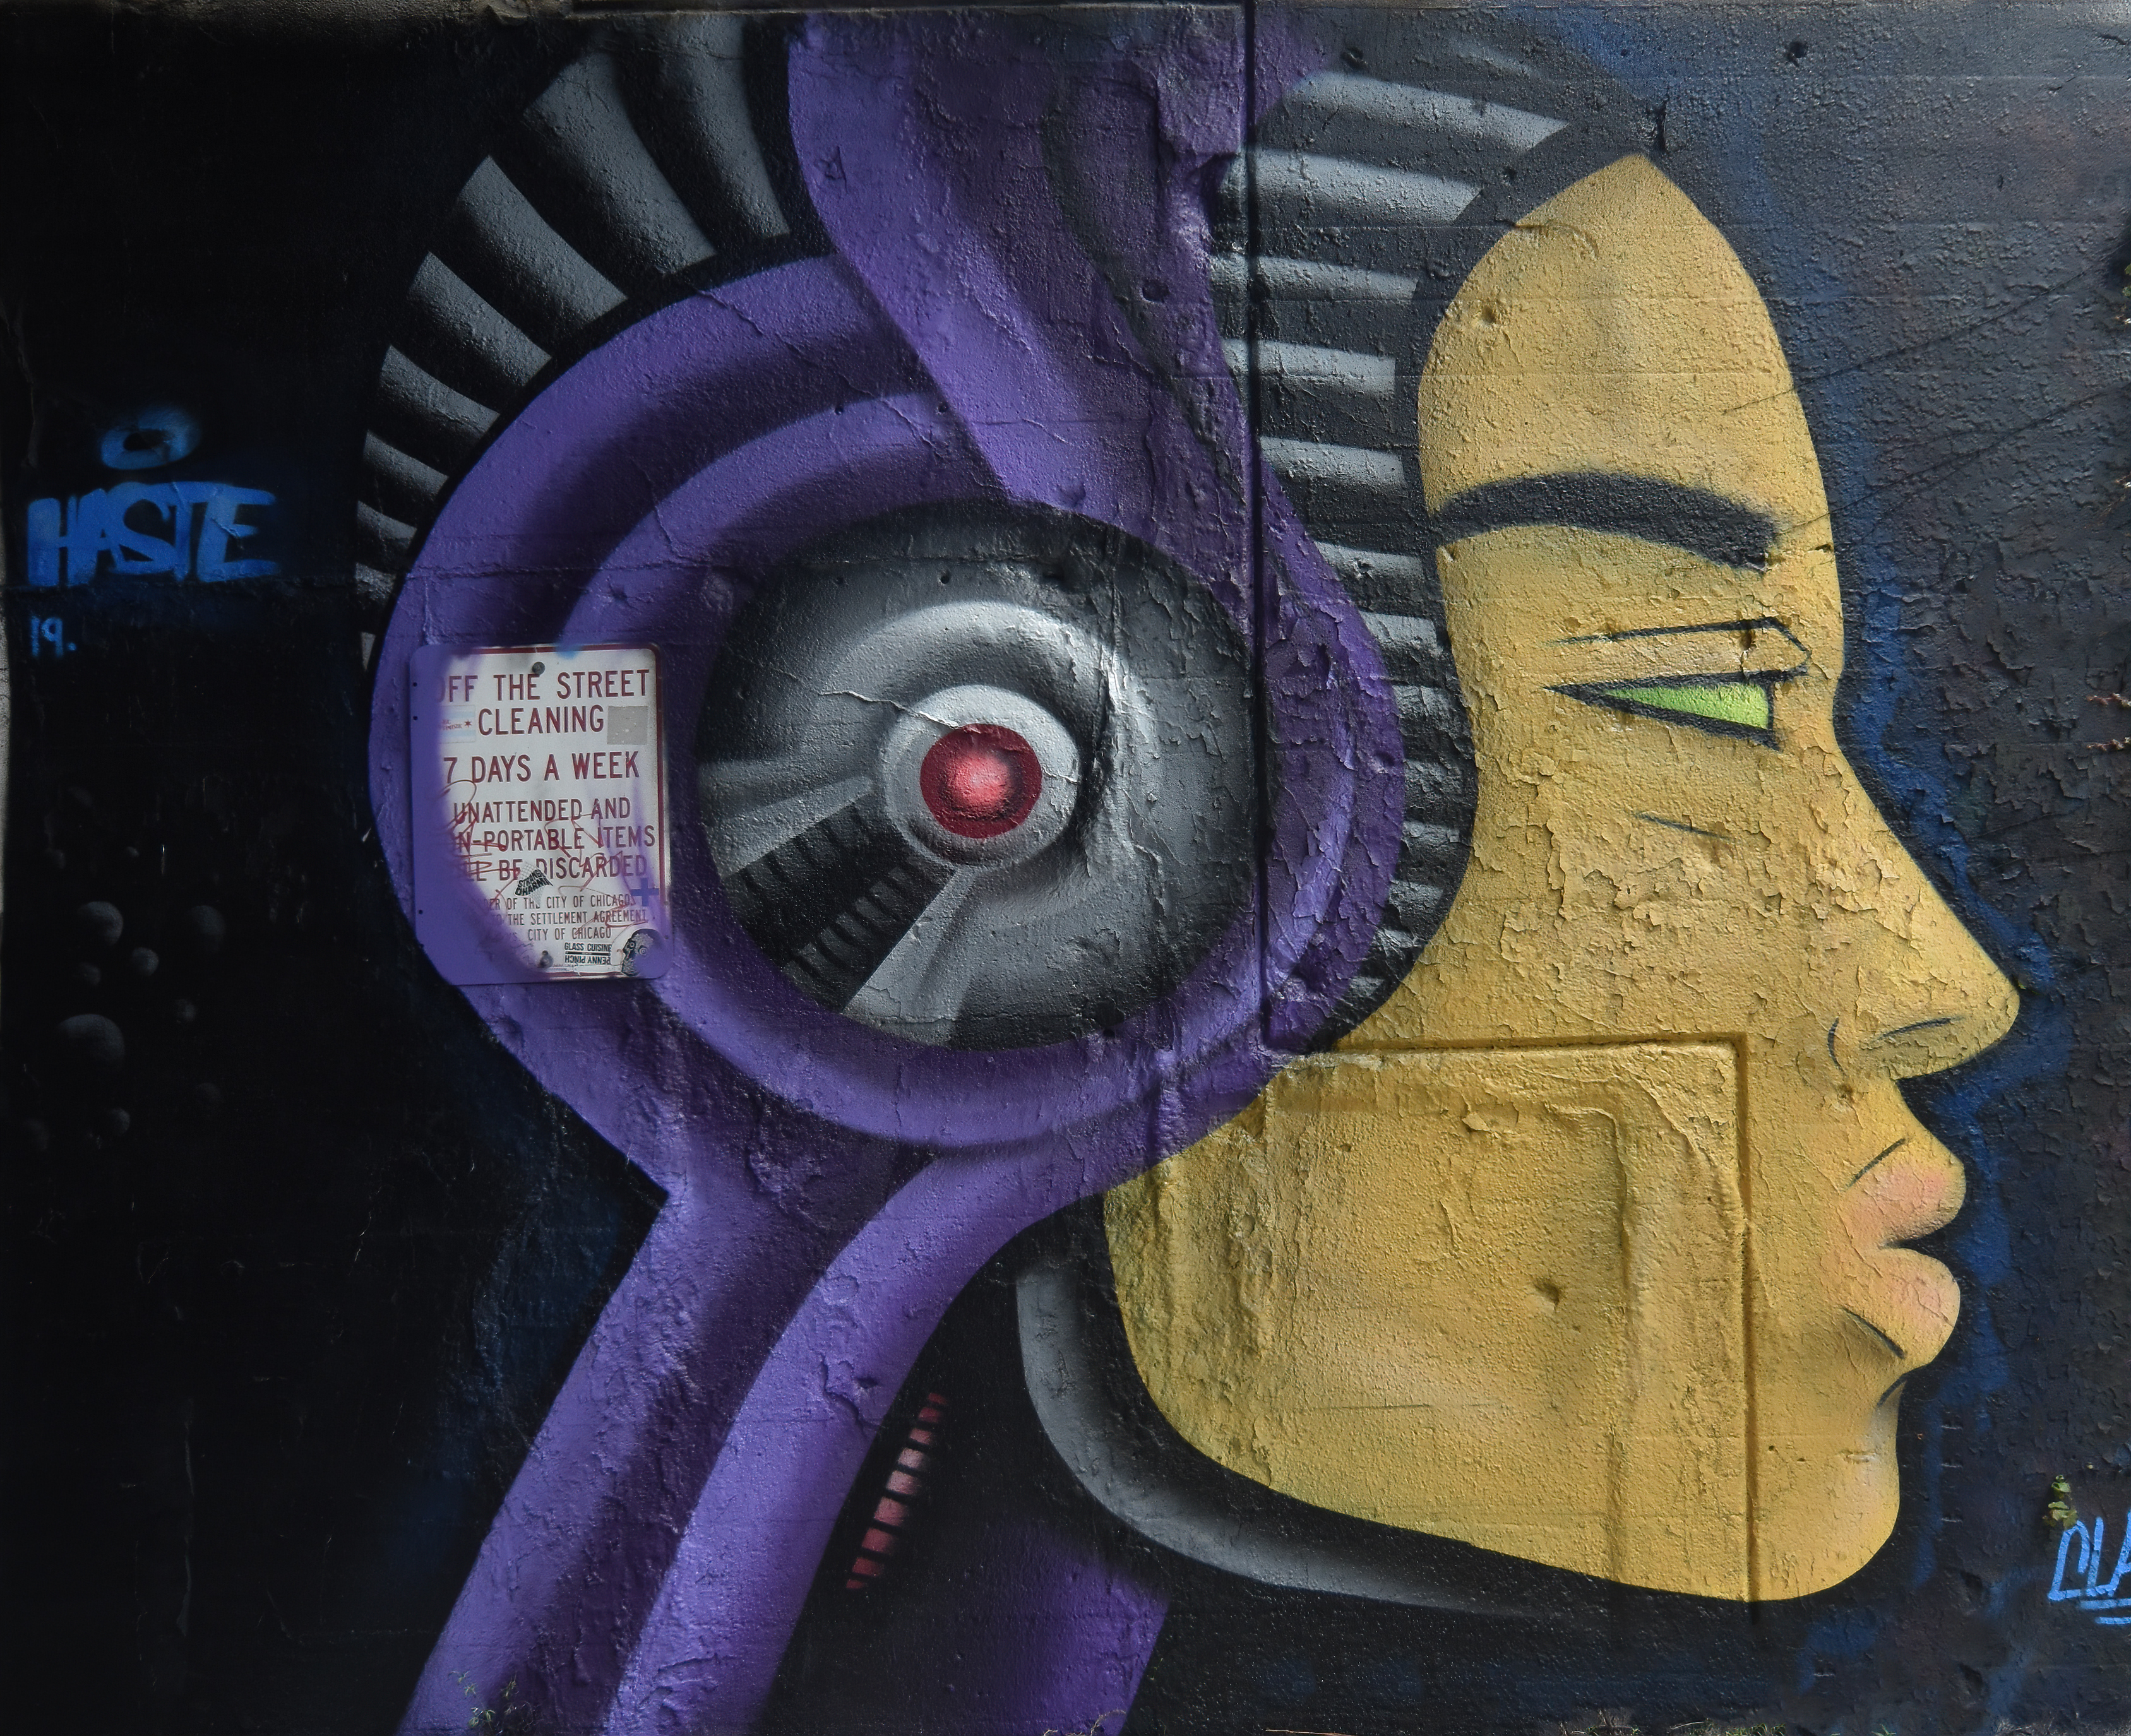 A graffiti mural of a cyborg head. Its face is human, but most of its skull is machinery, painted purple.